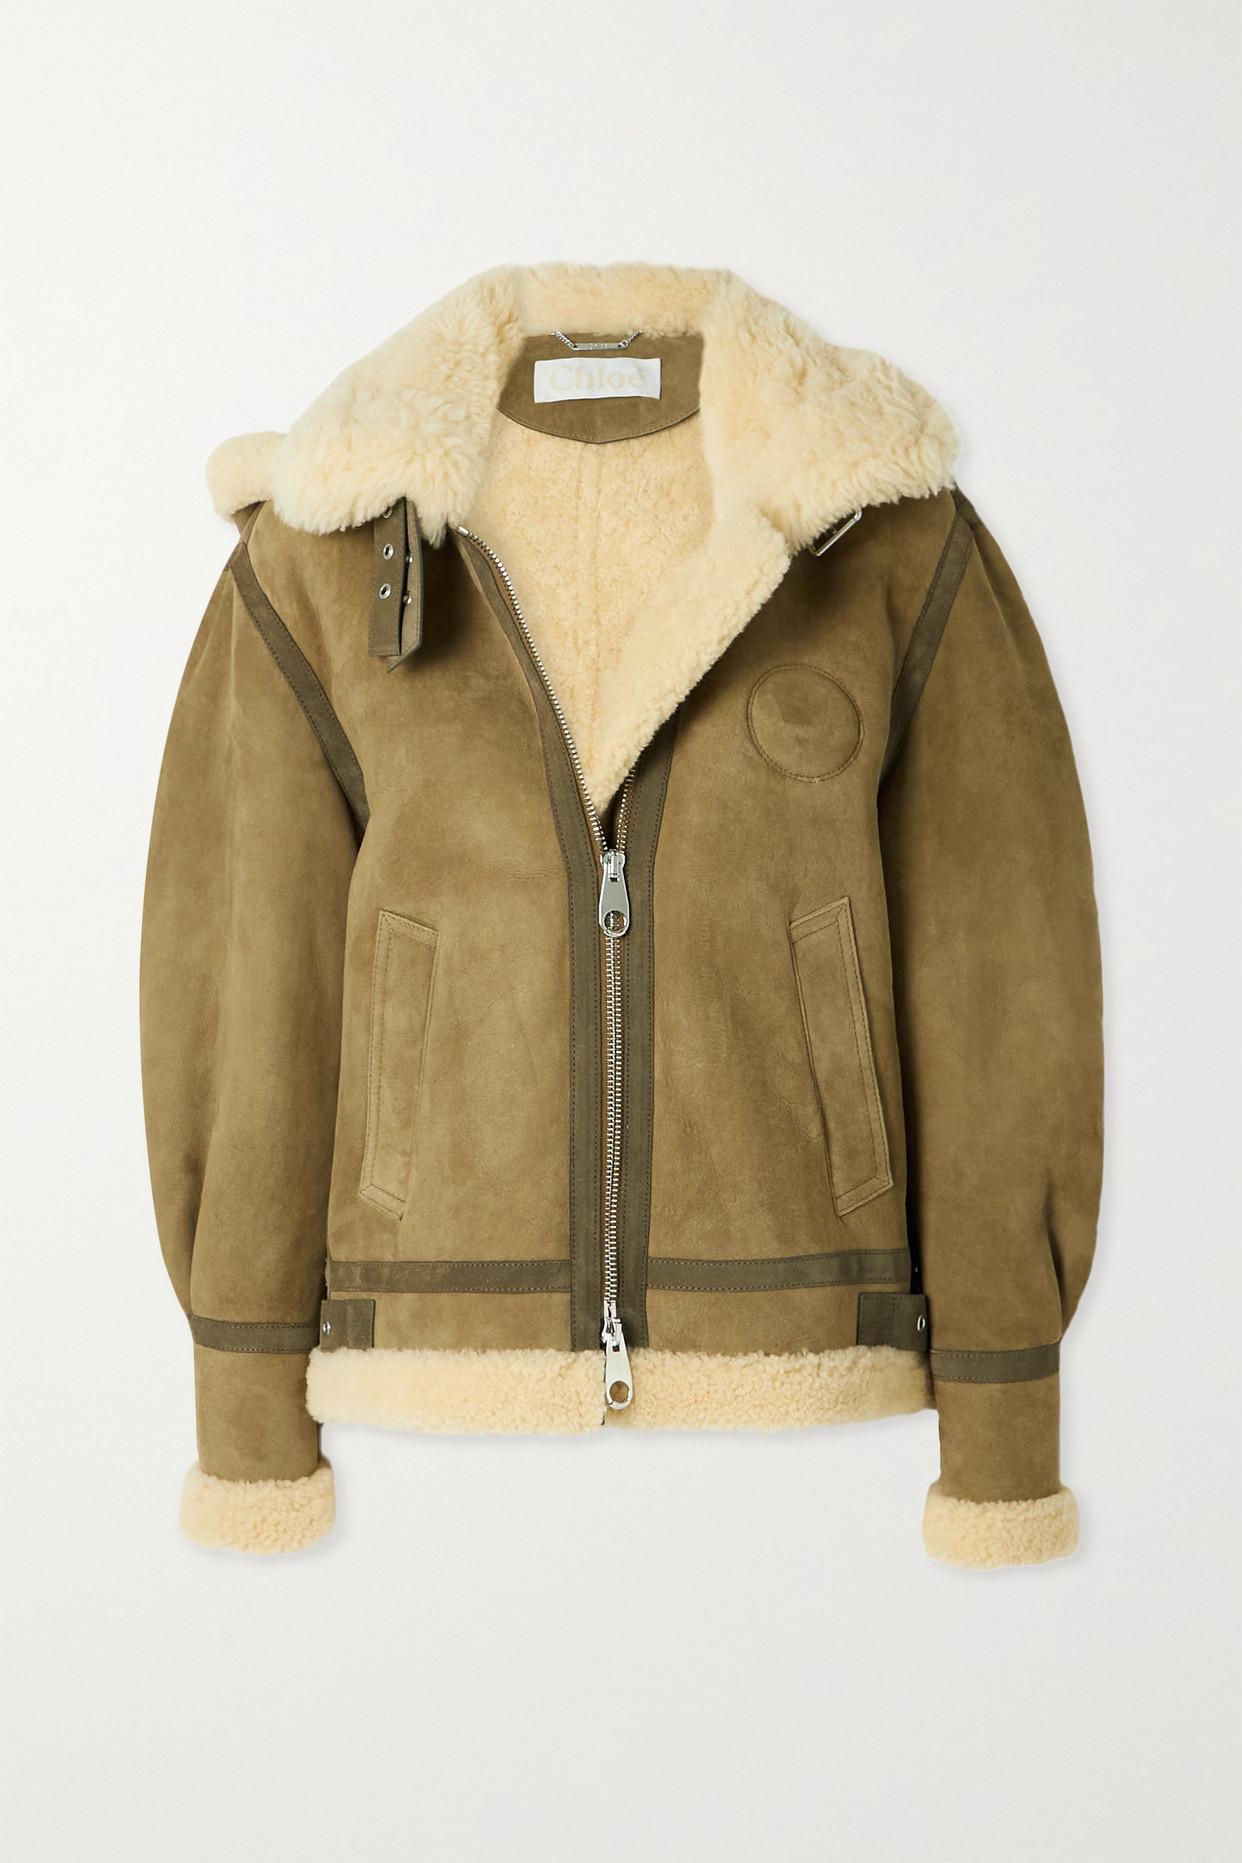 Chloé Hooded Suede-trimmed Shearling Jacket in Green | Lyst